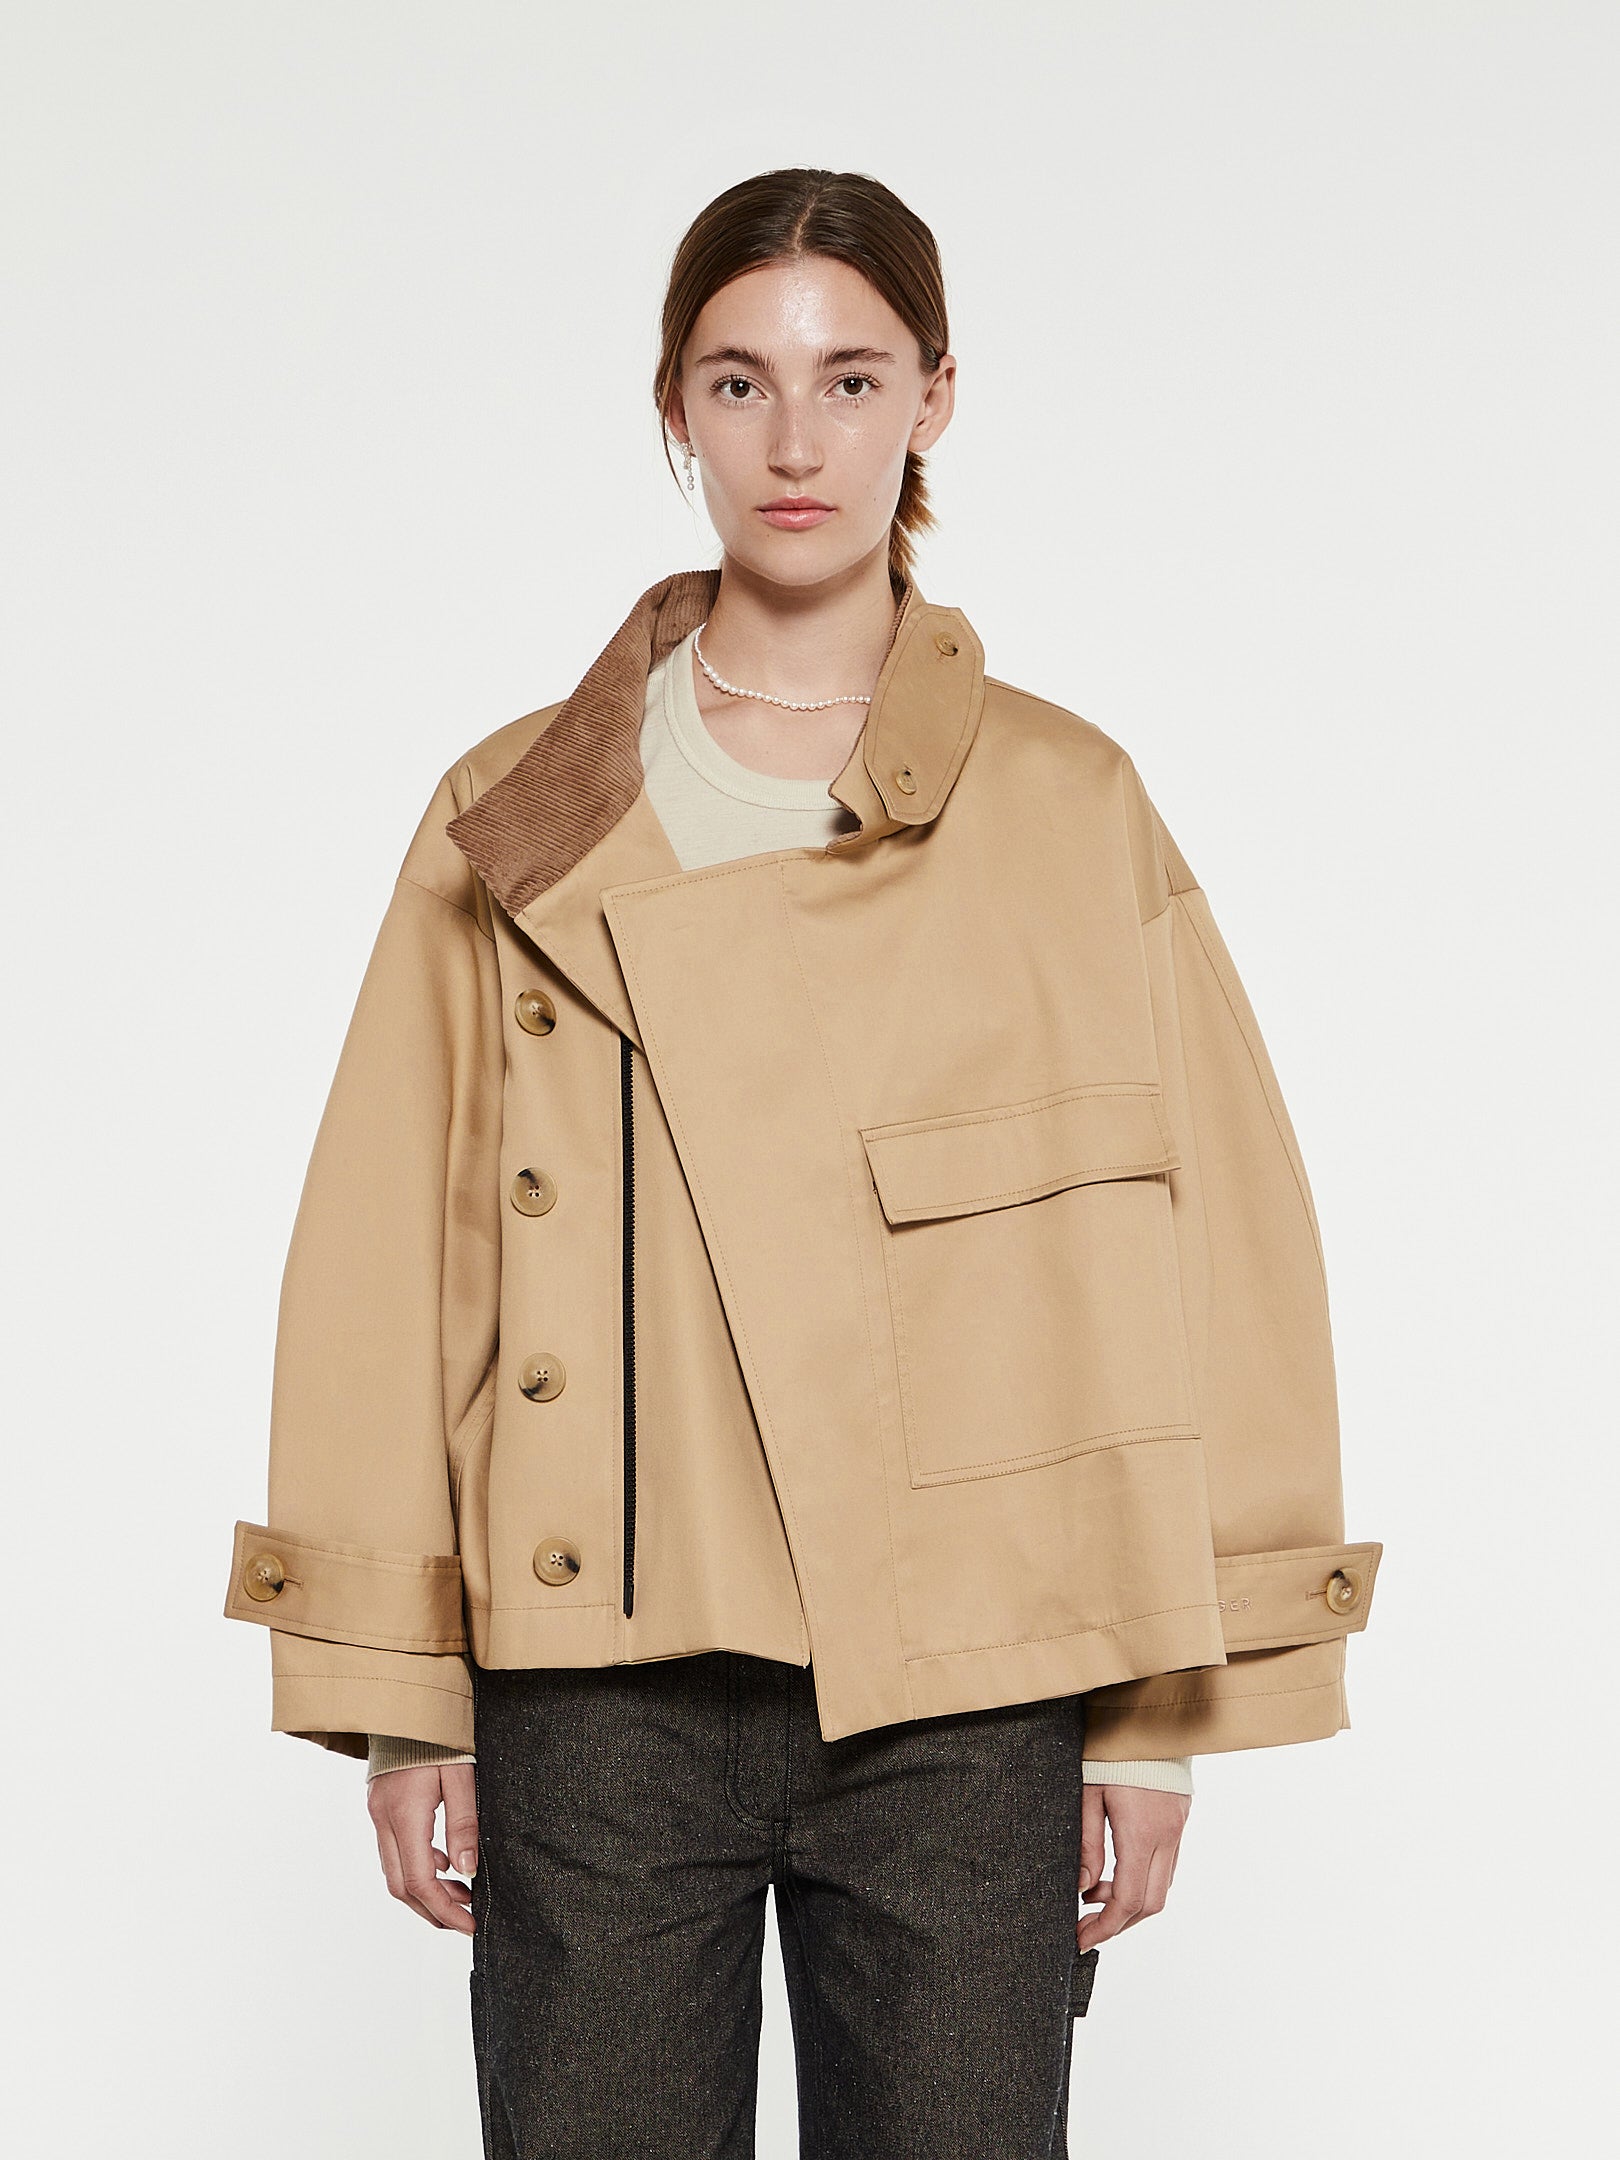 Coats & Jackets for women | Shop the selection at stoy | Parkas